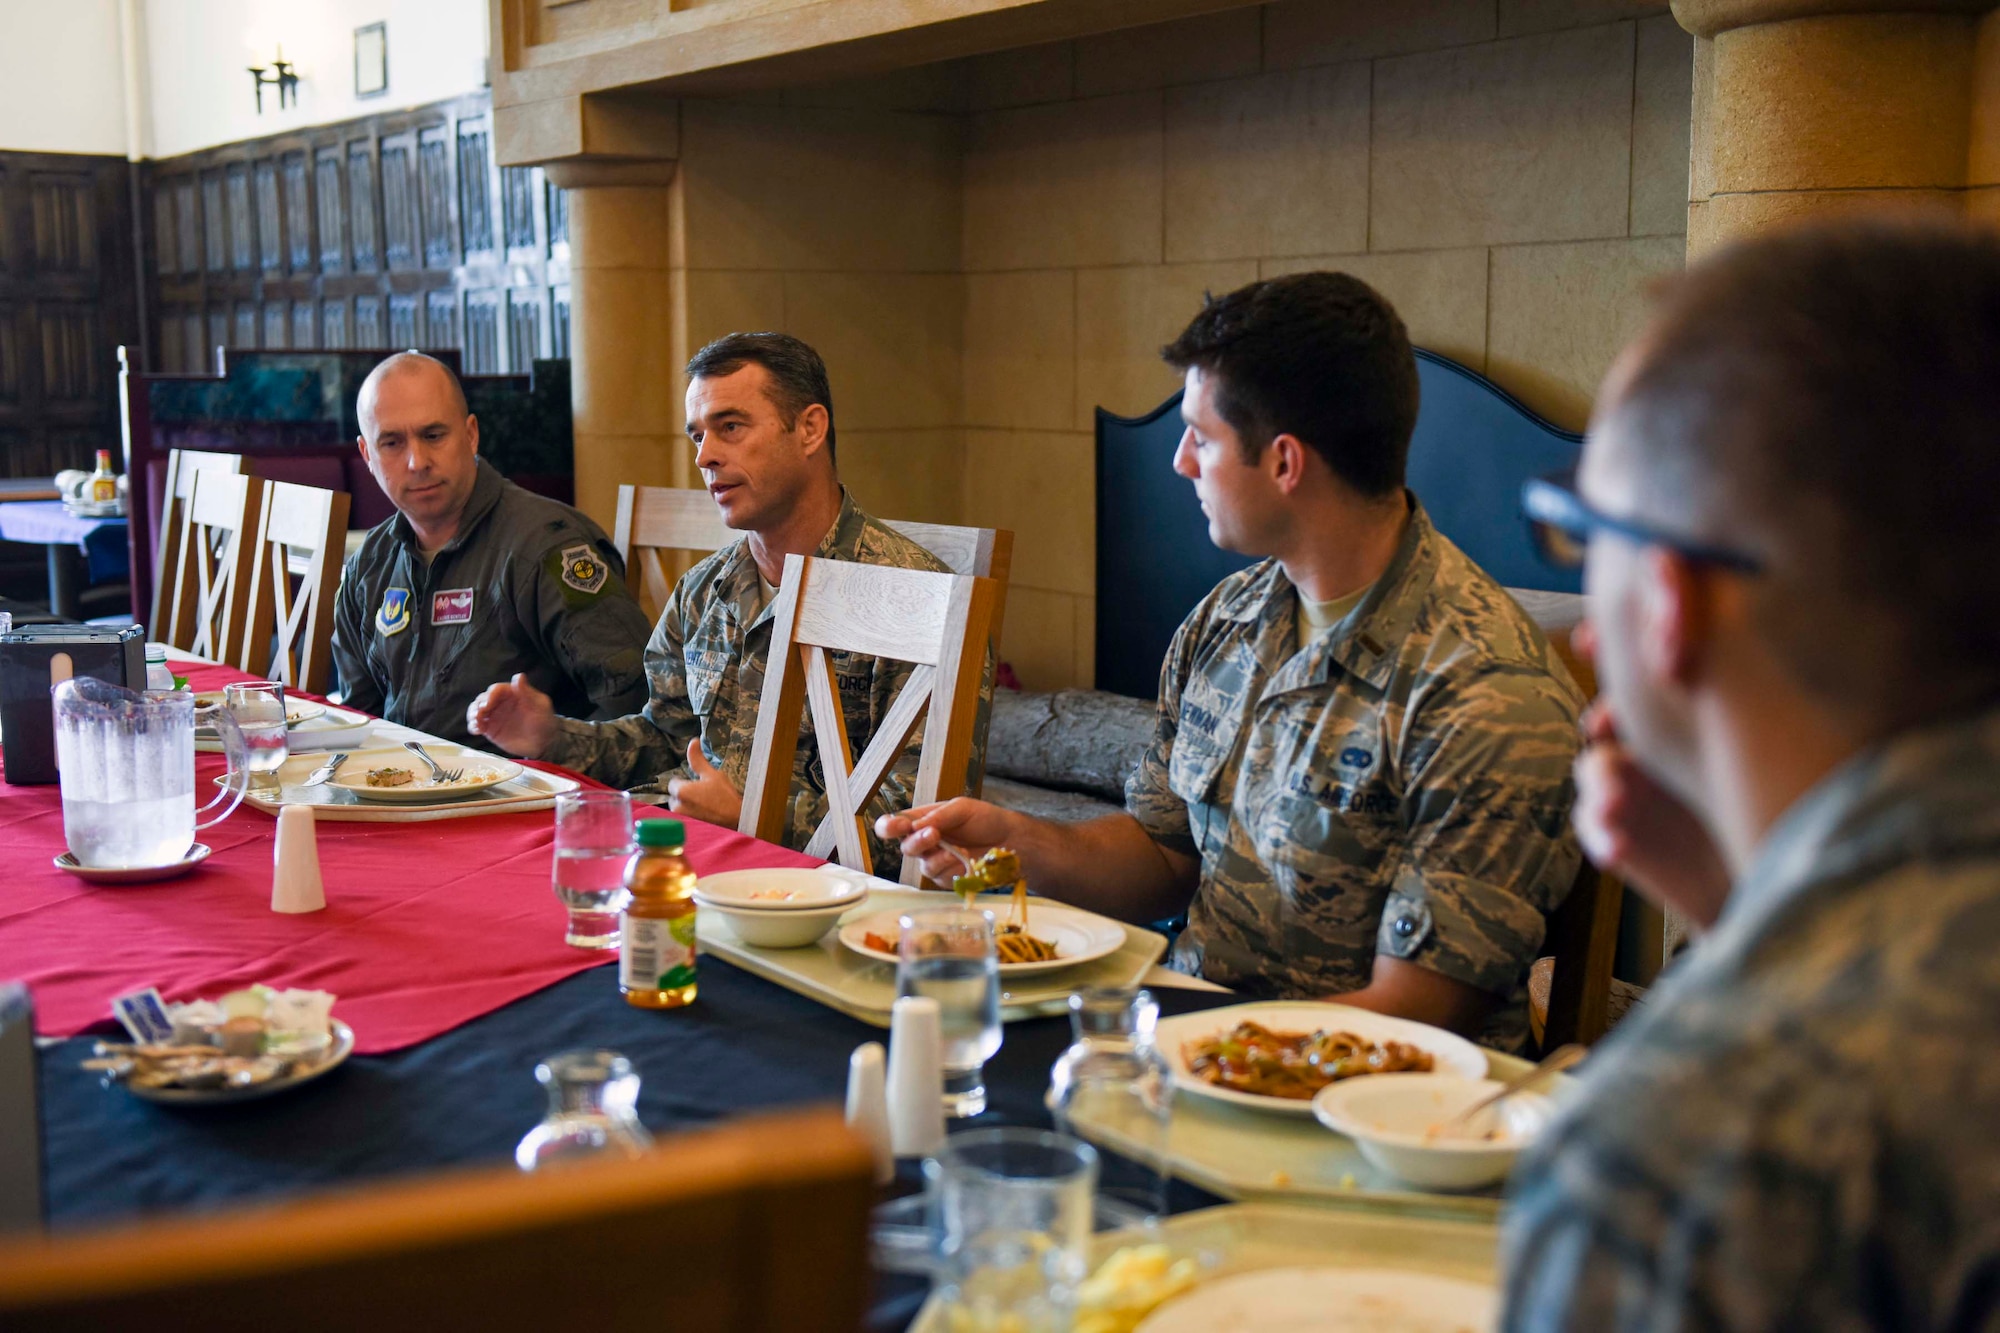 U.S. Air Force Col. John Kent, 48th Fighter Wing vice commander, speaks with flight commanders during a joint base flight commanders’ course lunch at RAF Mildenhall, England, Oct. 26, 2018. Both vice commanders from the 48th FW and 100th Air Refueling Wing answered questions from  flight or squadron commanders had. (U.S. Air Force photo by Staff Sgt. Christine Groening)